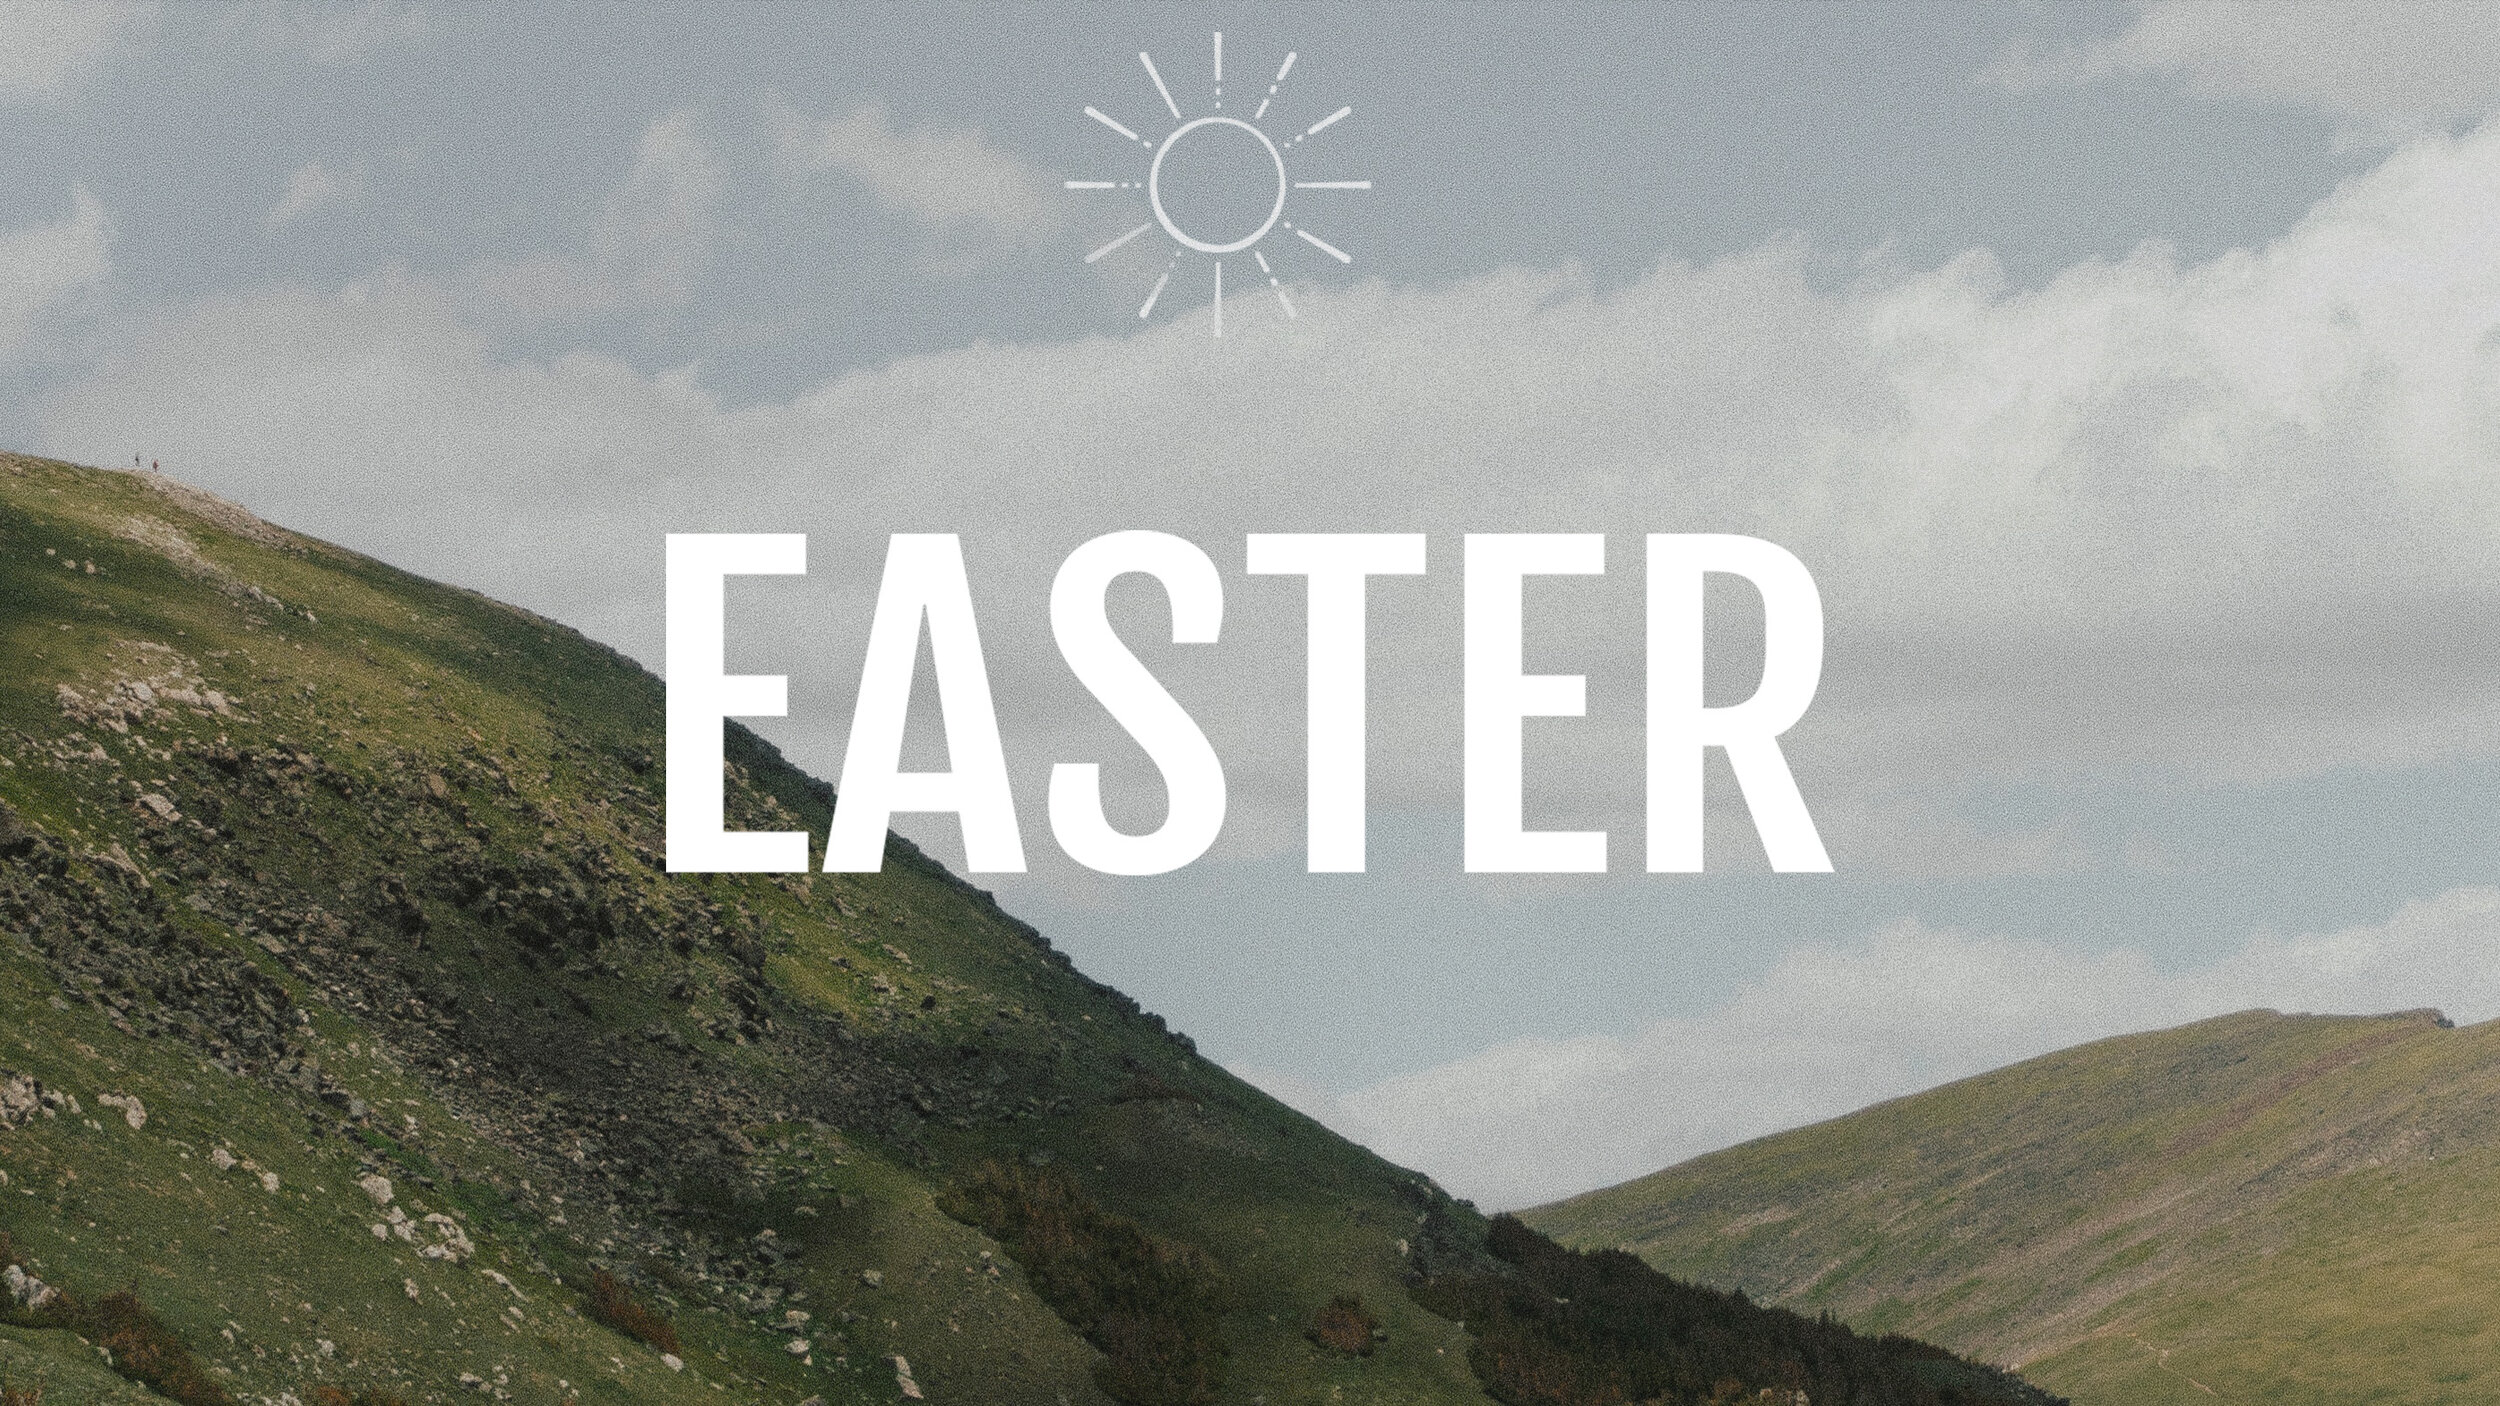 Easter - Main Graphic - High Res.jpg